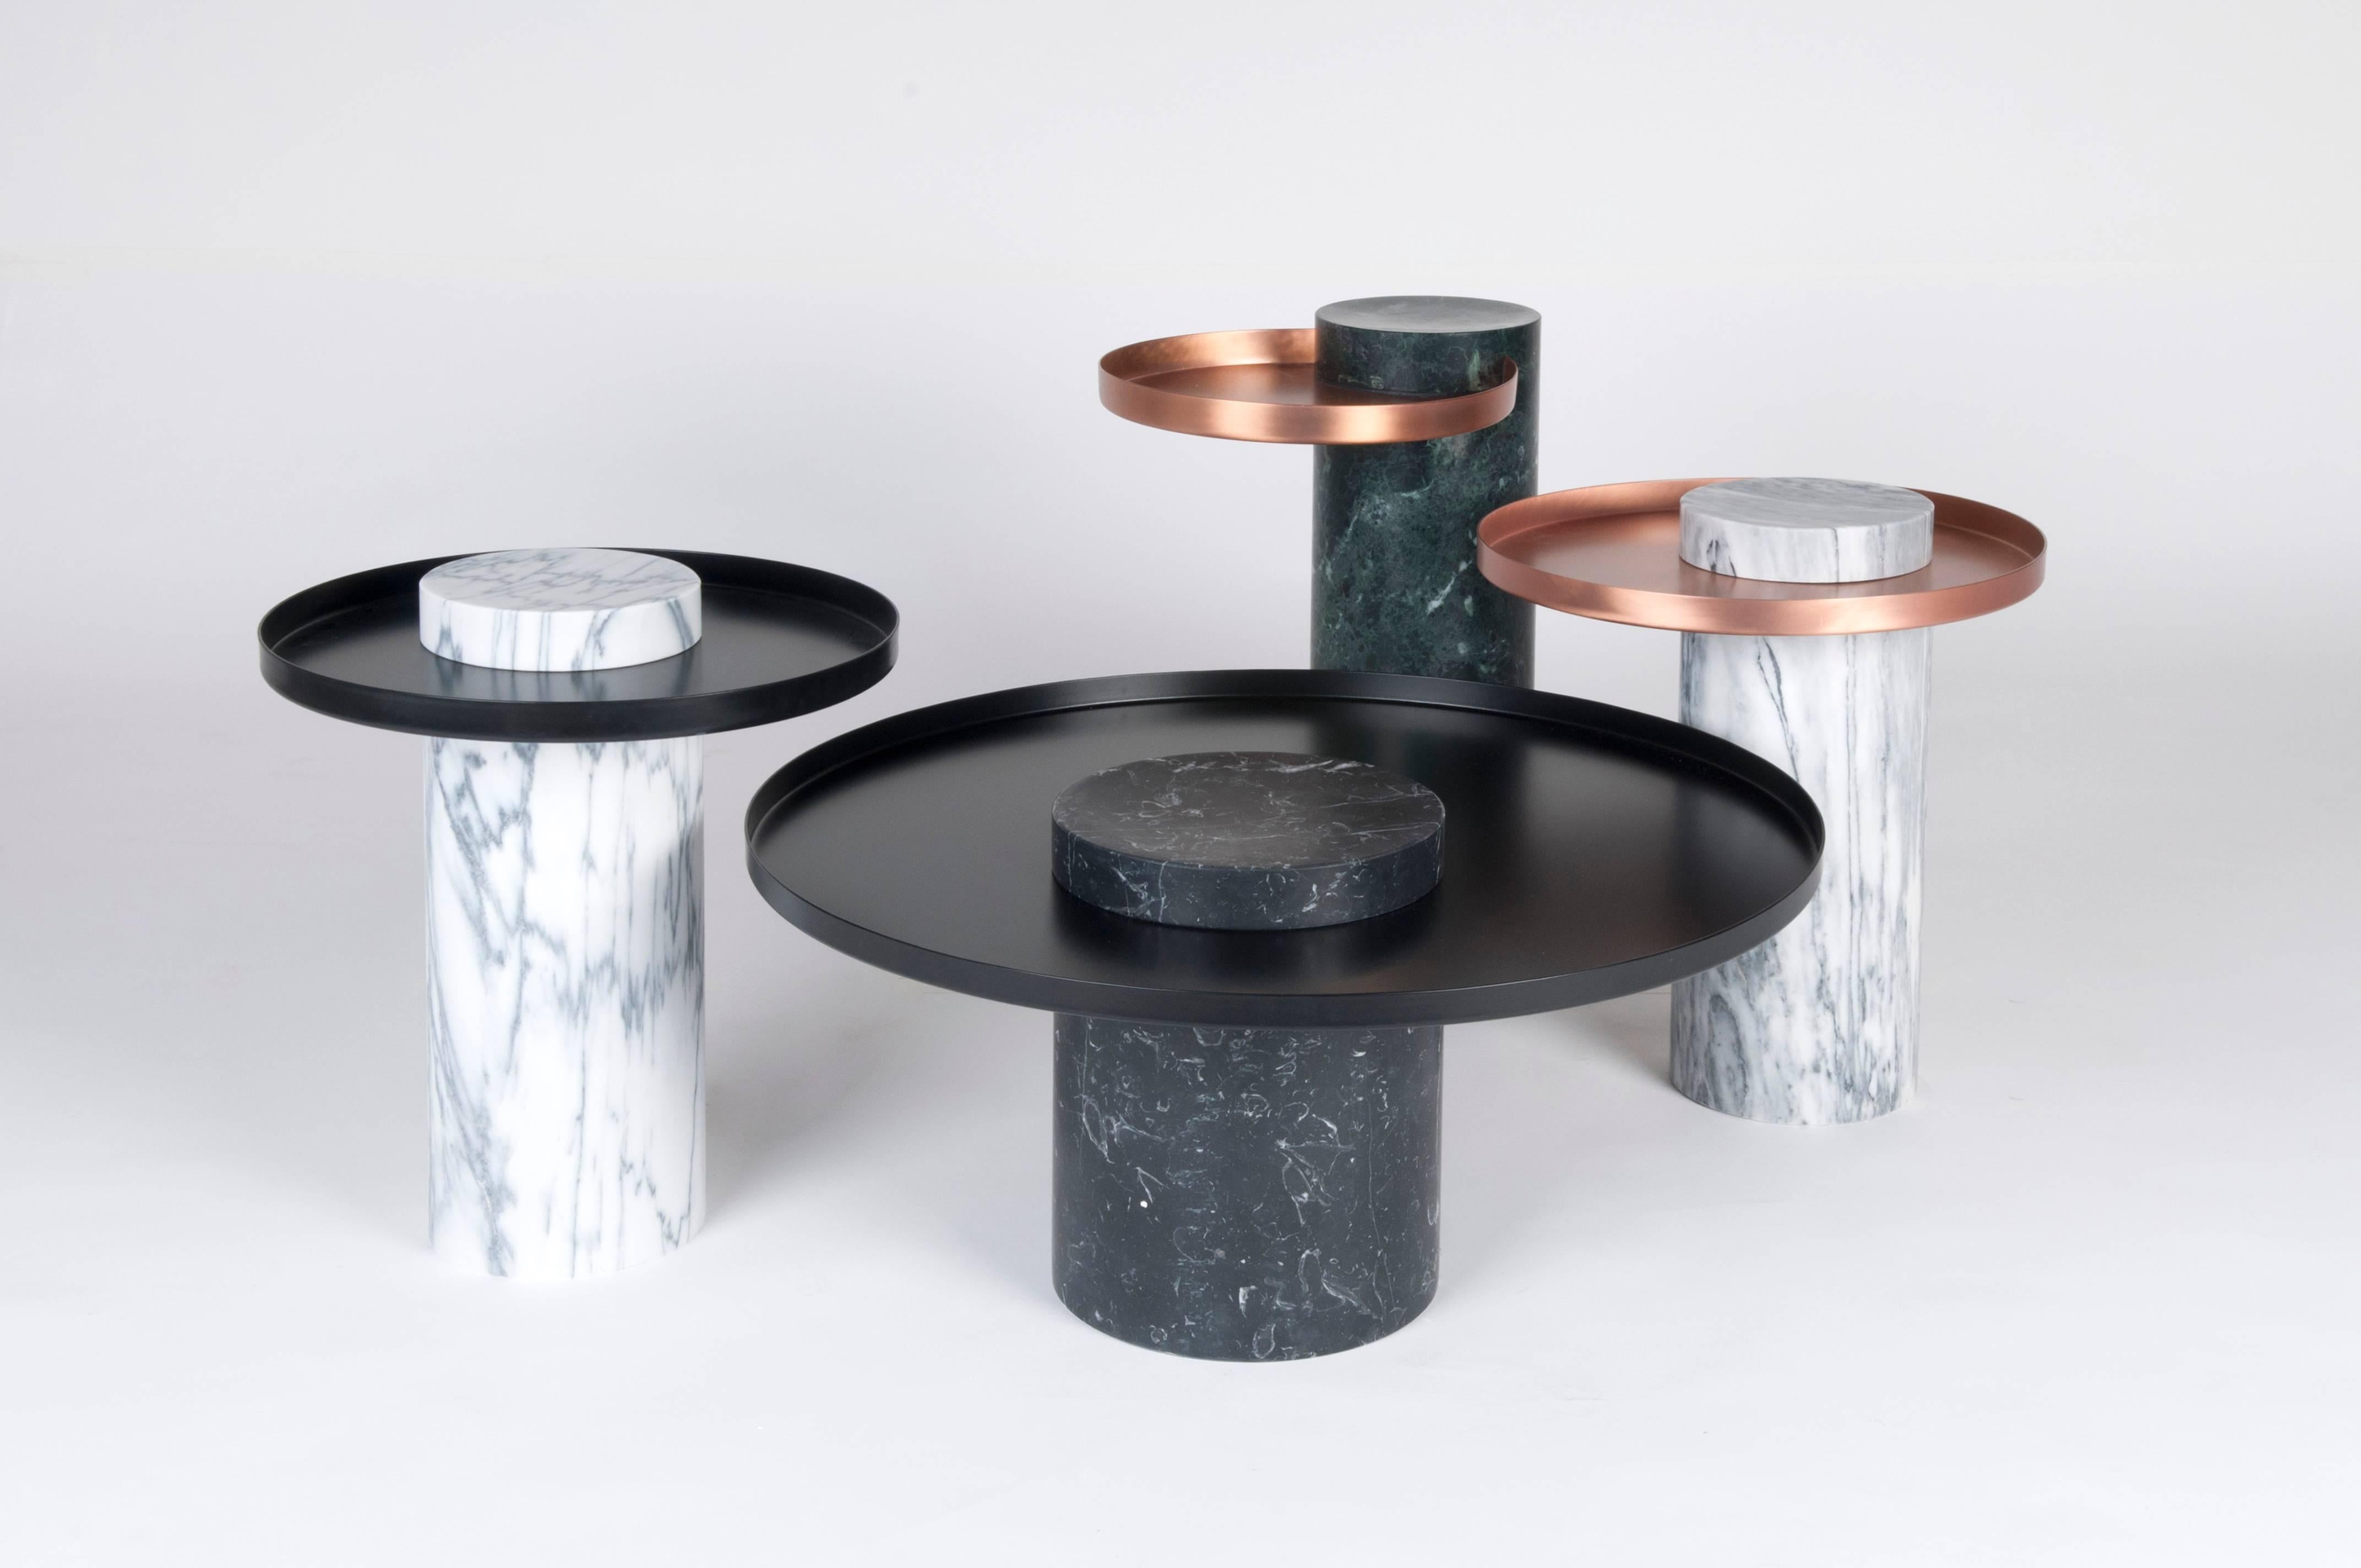 Medium Indian green marble contemporary guéridon, Sebastian Herkner
Dimensions: D 40 x H 46 cm
Materials: Indian Green marble, copper

The salute table exists in 3 sizes, 4 different marble stones for the column and 5 different finishes for the